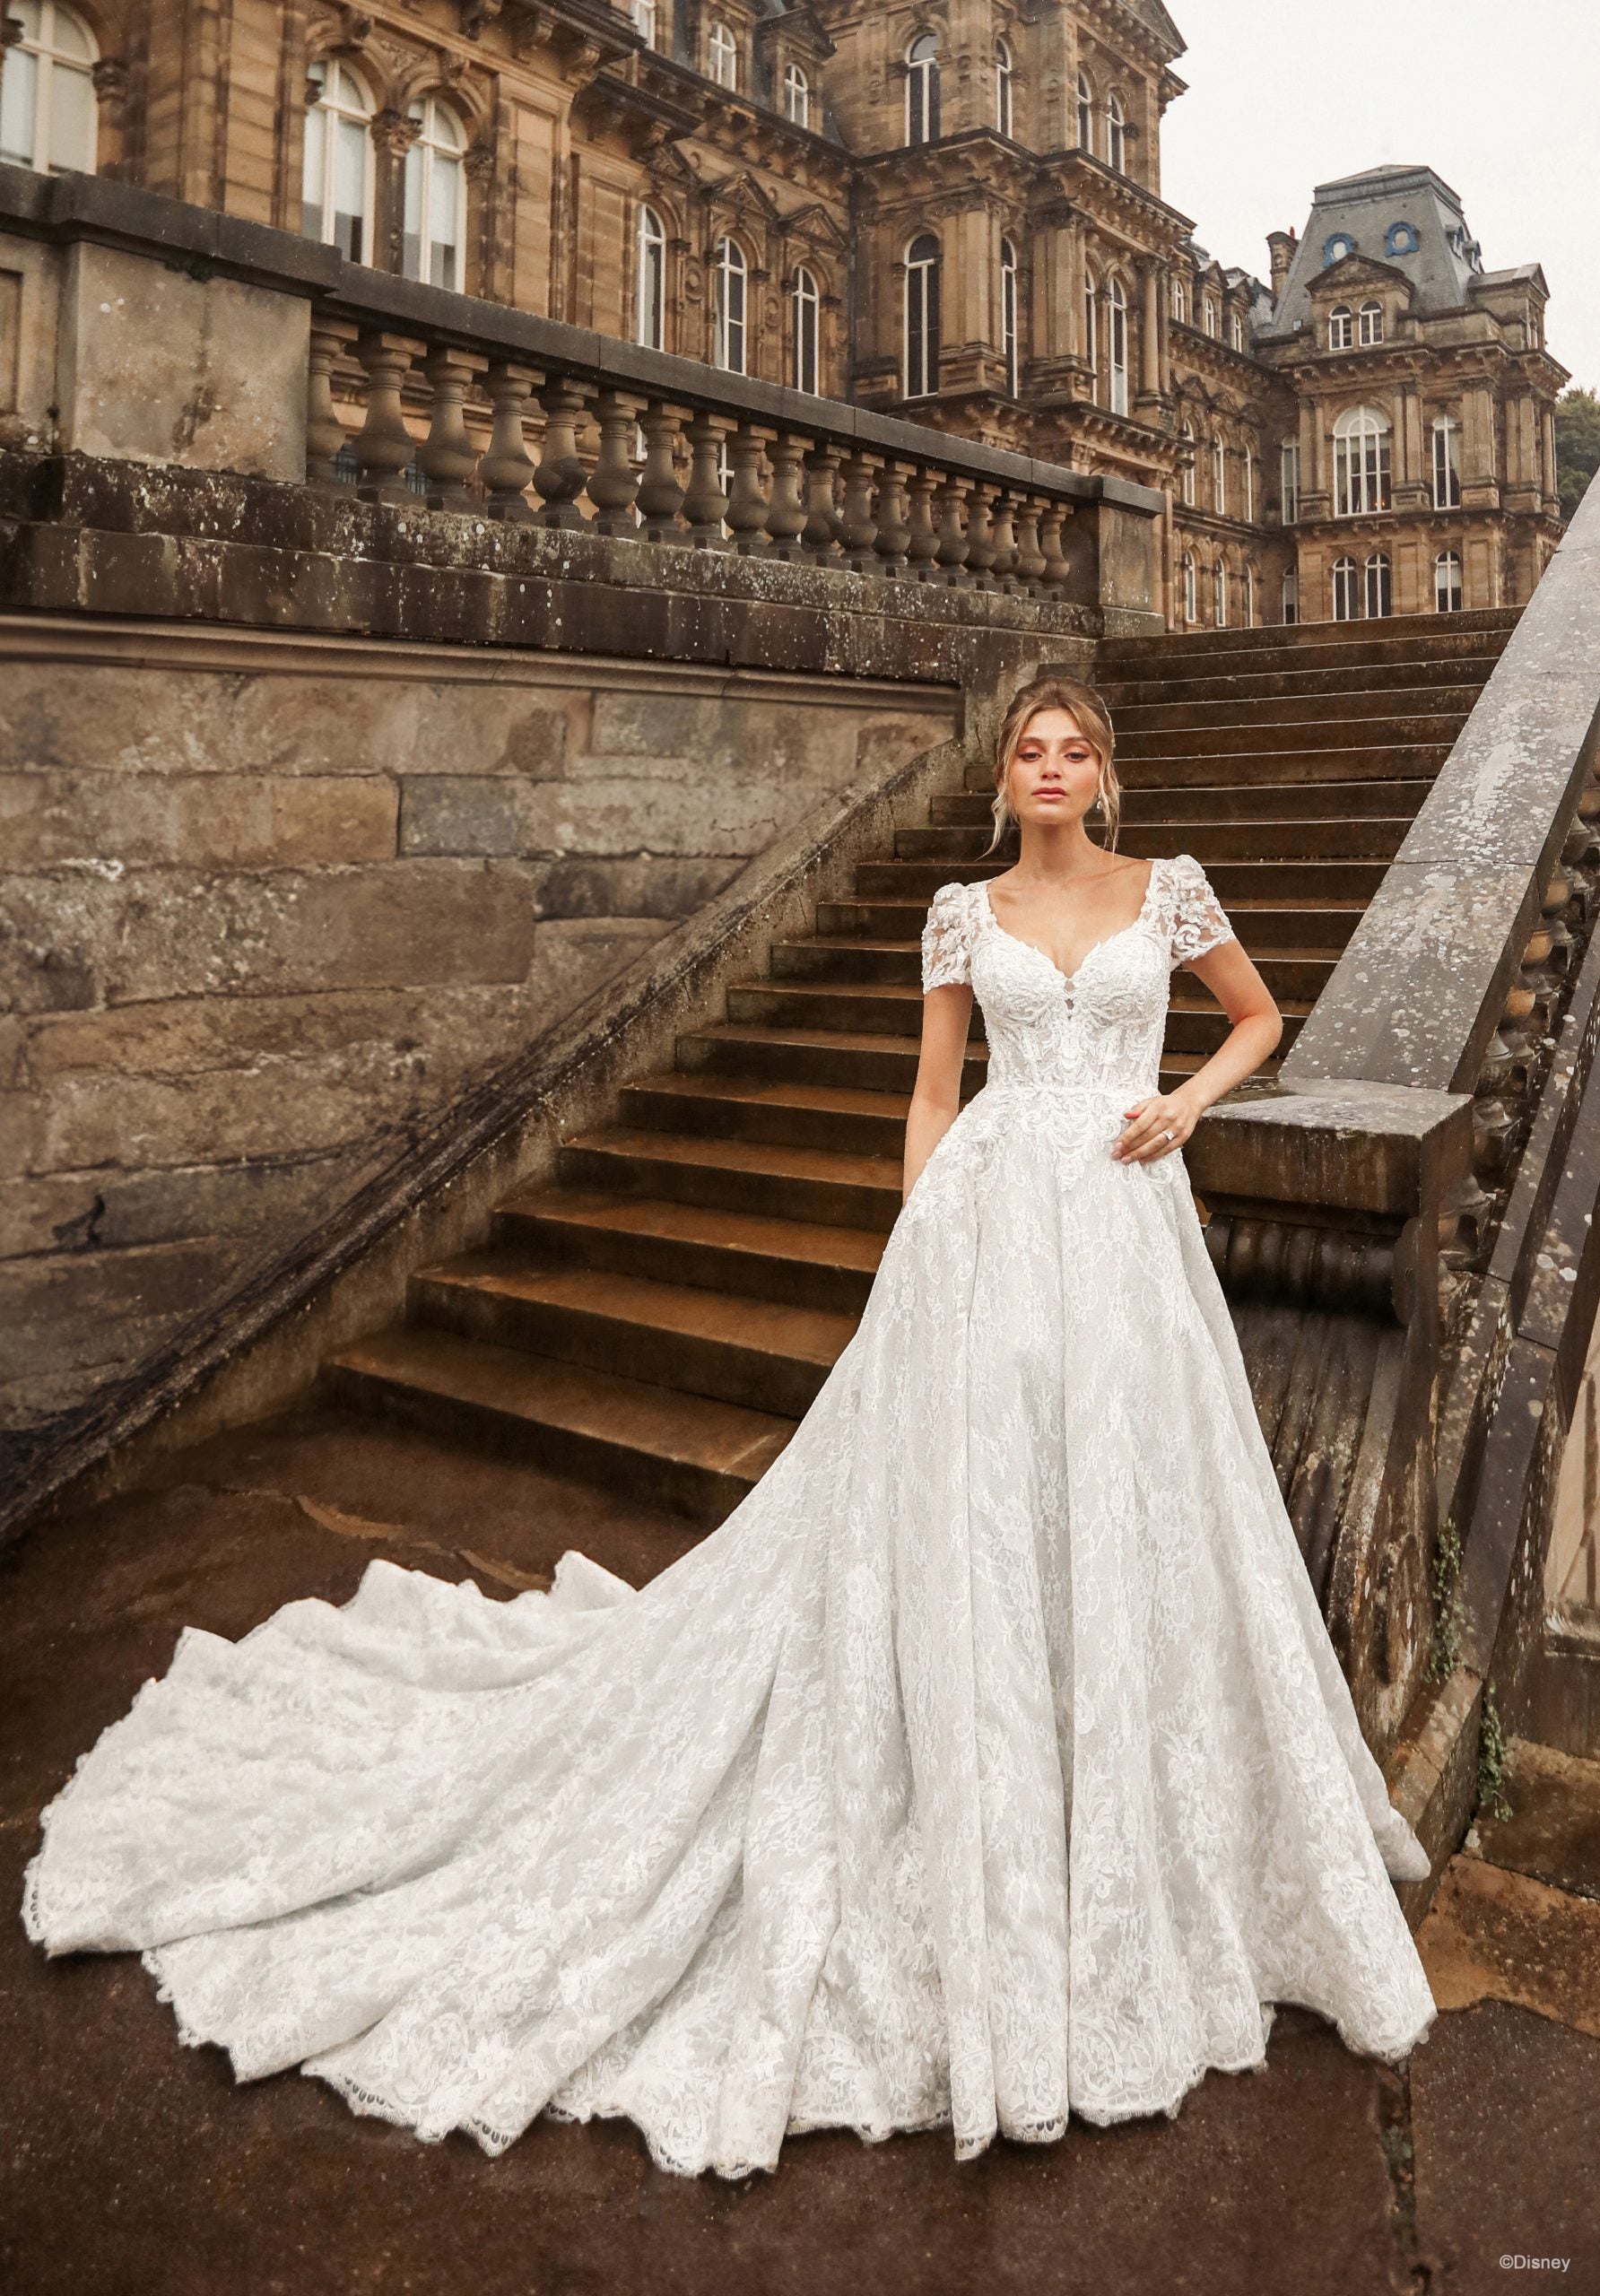 The Disney Fairy Tale Weddings Collection Trunk Show in Denver